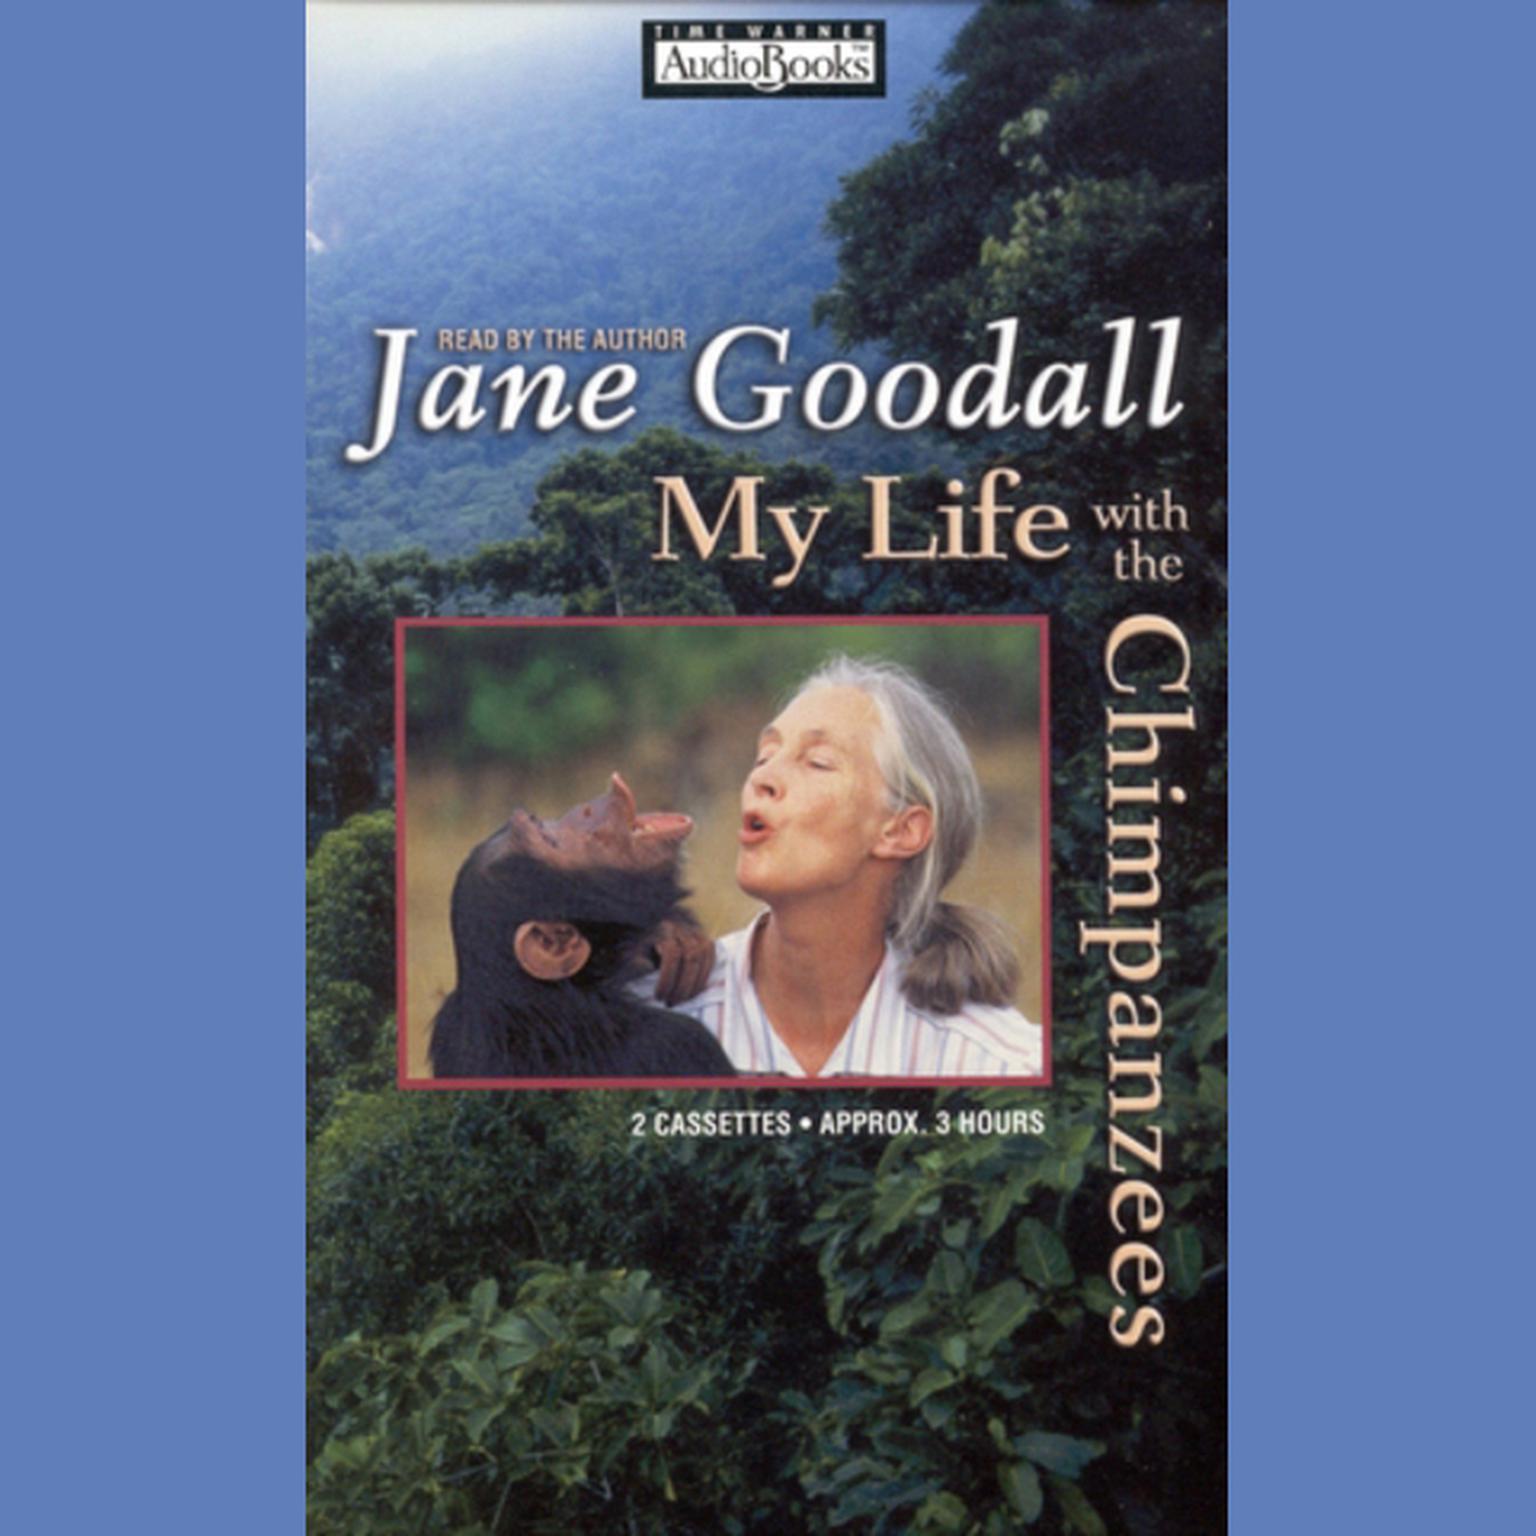 My Life with the Chimpanzees (Abridged) Audiobook, by Jane Goodall